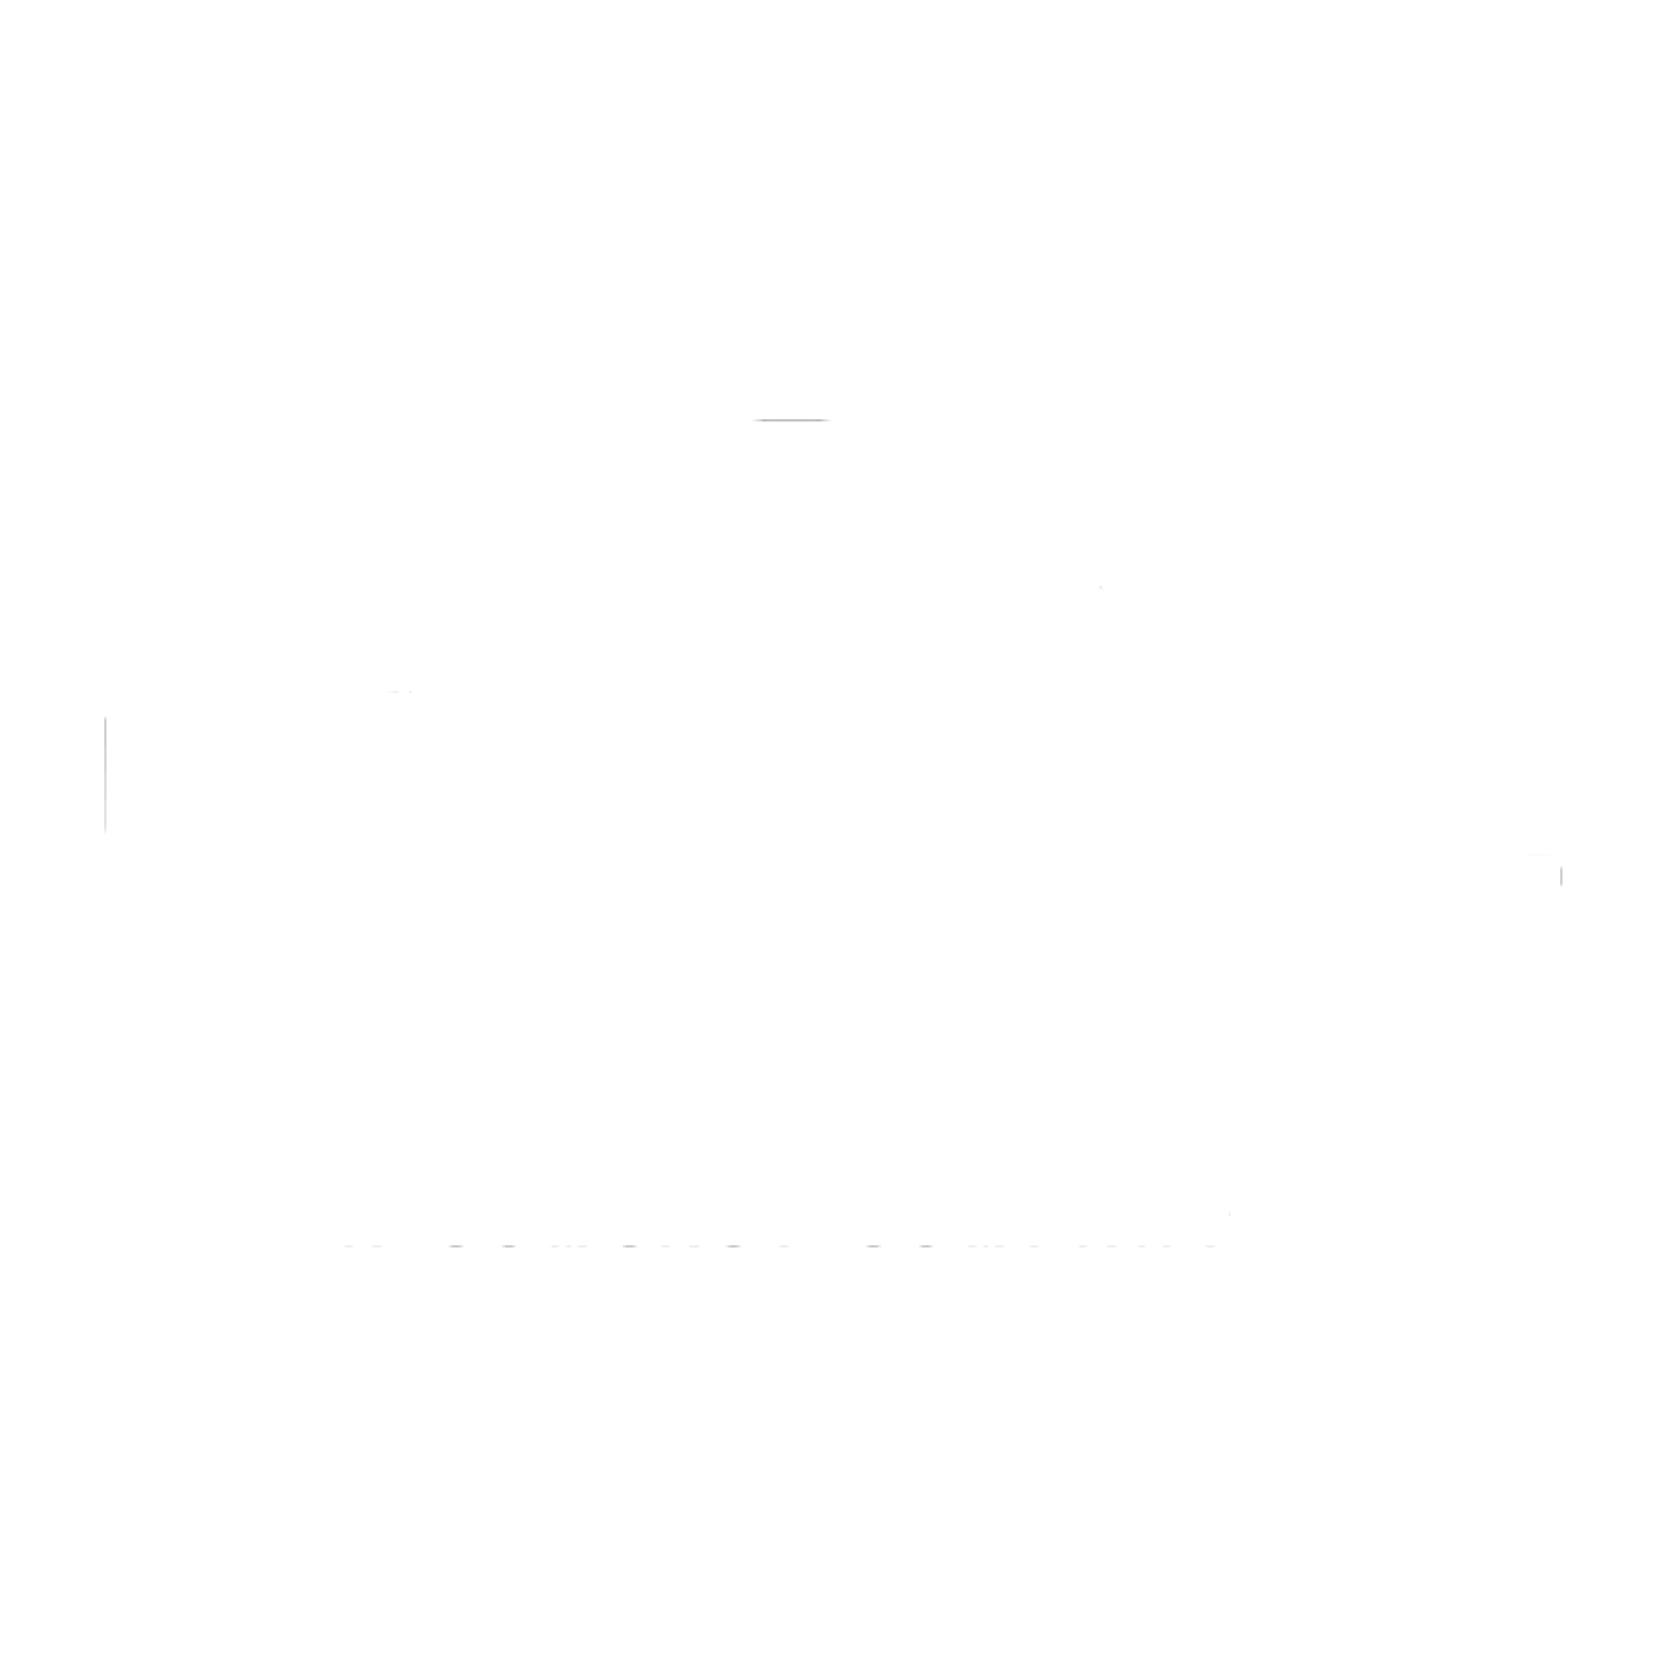 Universal.png